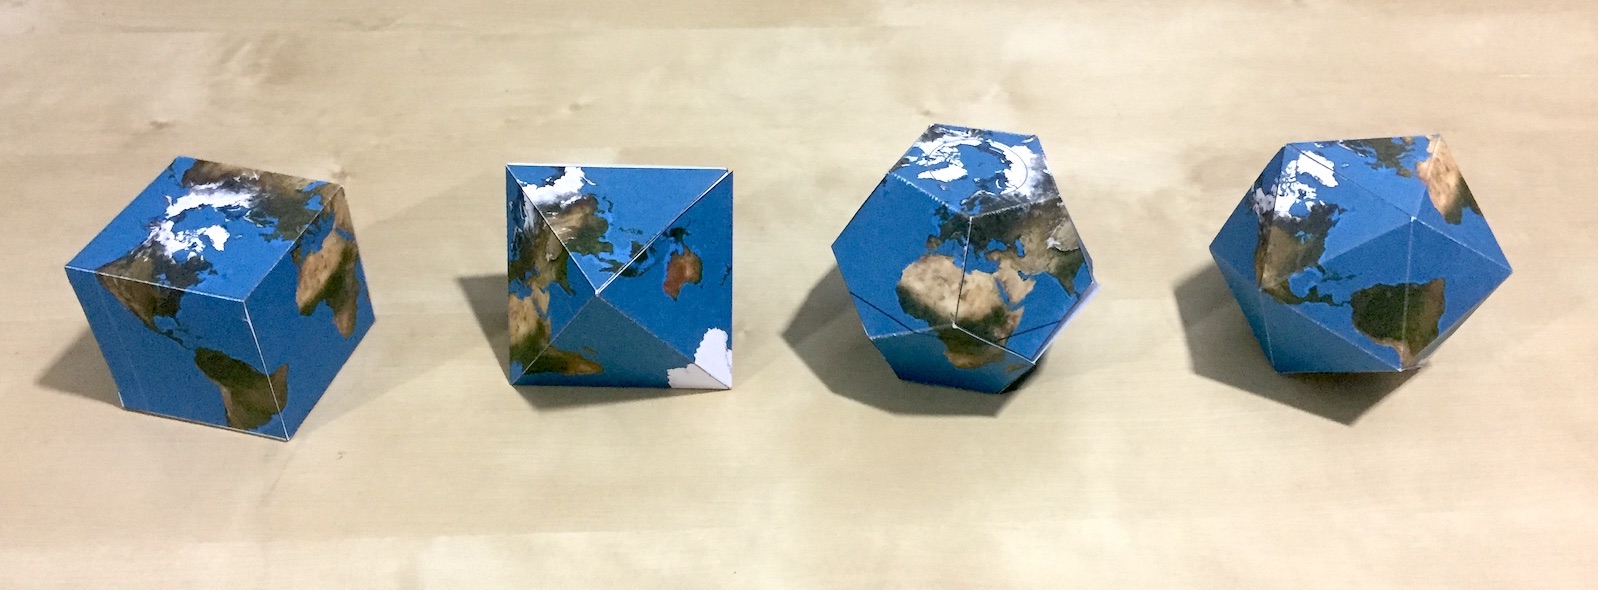 Four folded paper globes in the shapes of a cube, an octahedron, a dodecahedron, and an icosahedron